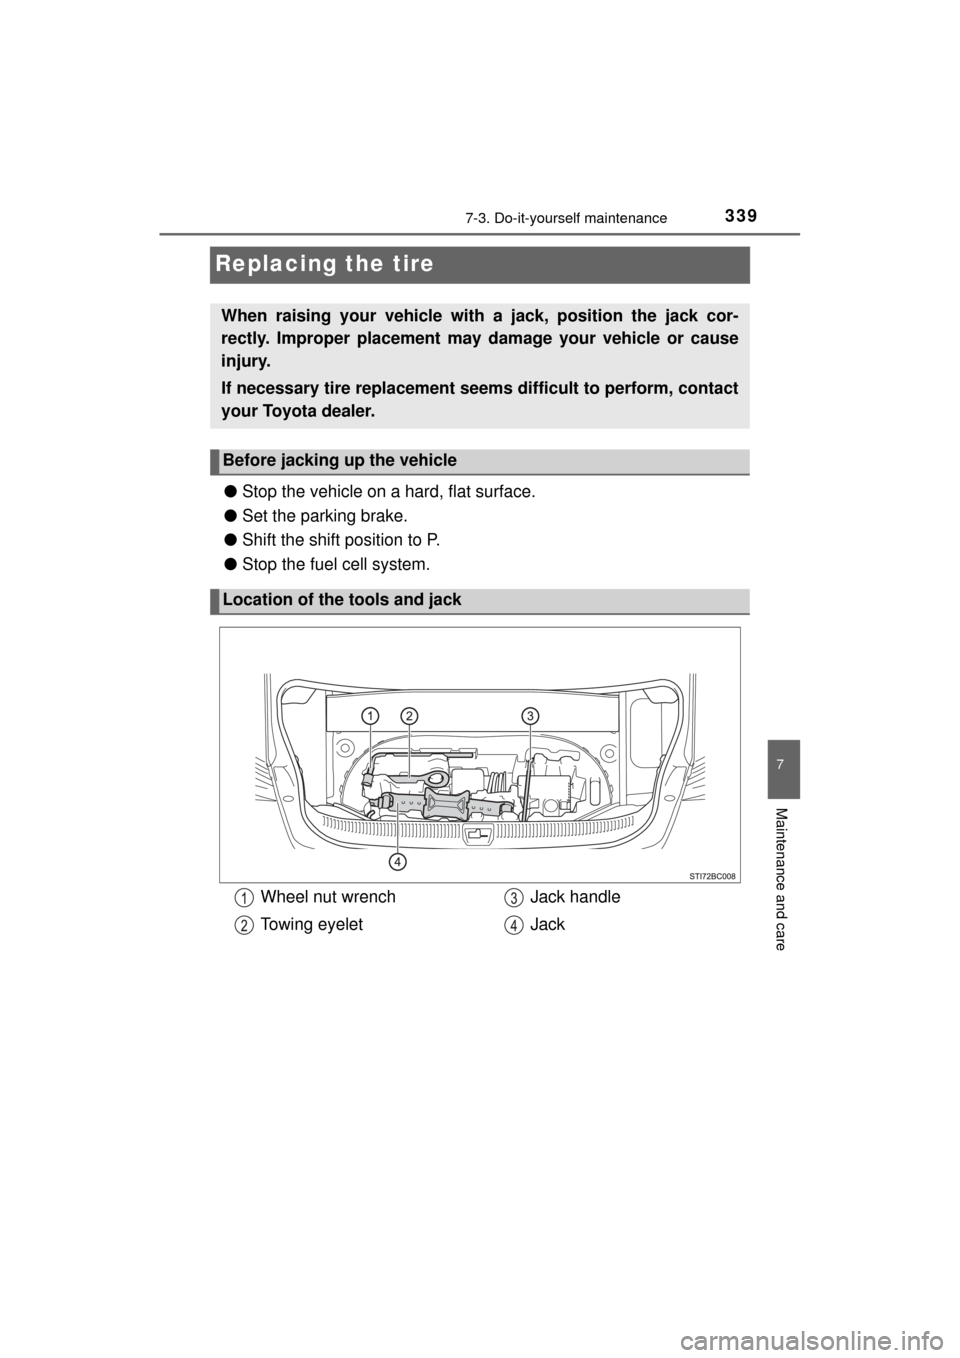 TOYOTA MIRAI 2017 1.G User Guide 3397-3. Do-it-yourself maintenance
MIRAI_OM_USA_OM62023U
7
Maintenance and care
Replacing the tire
●Stop the vehicle on a  hard, flat surface.
● Set the parking brake.
● Shift the shift position